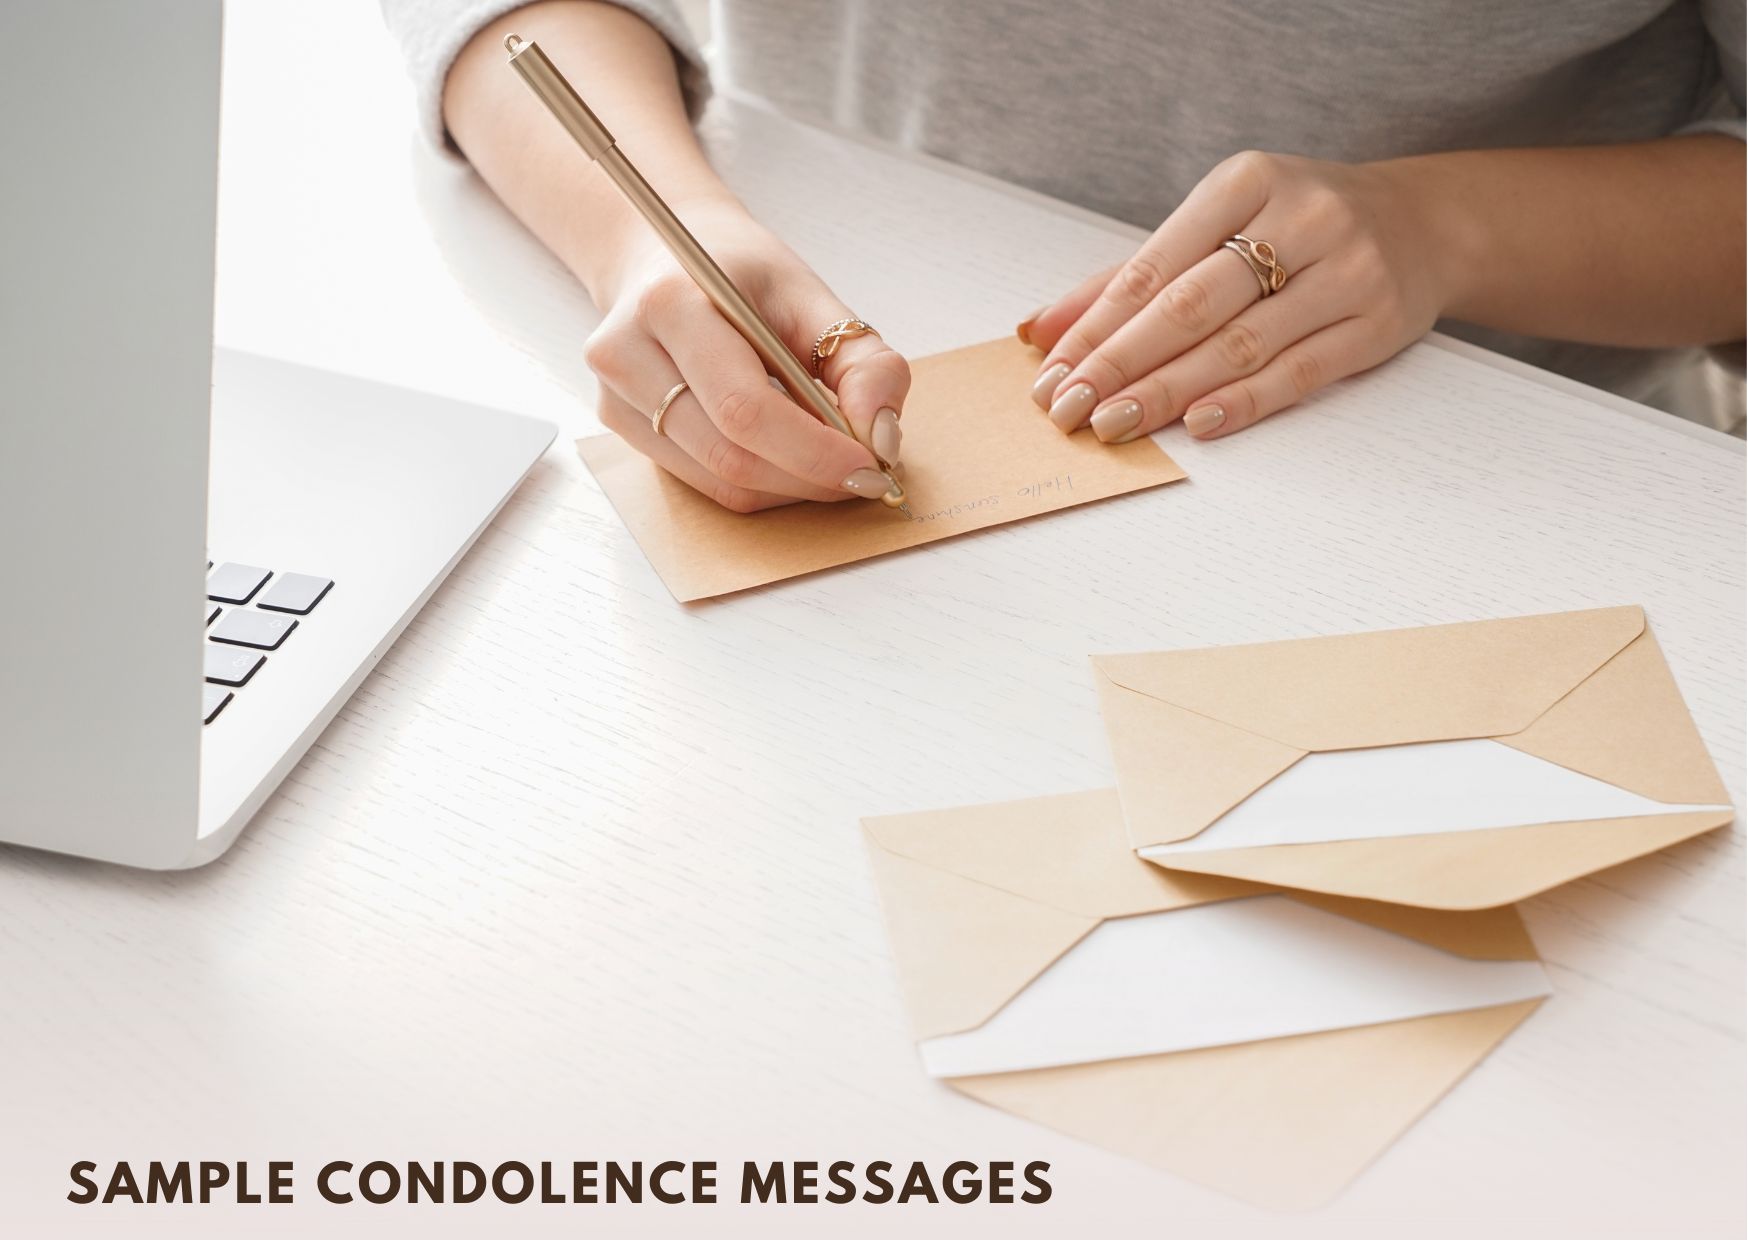 Sample condolence messages